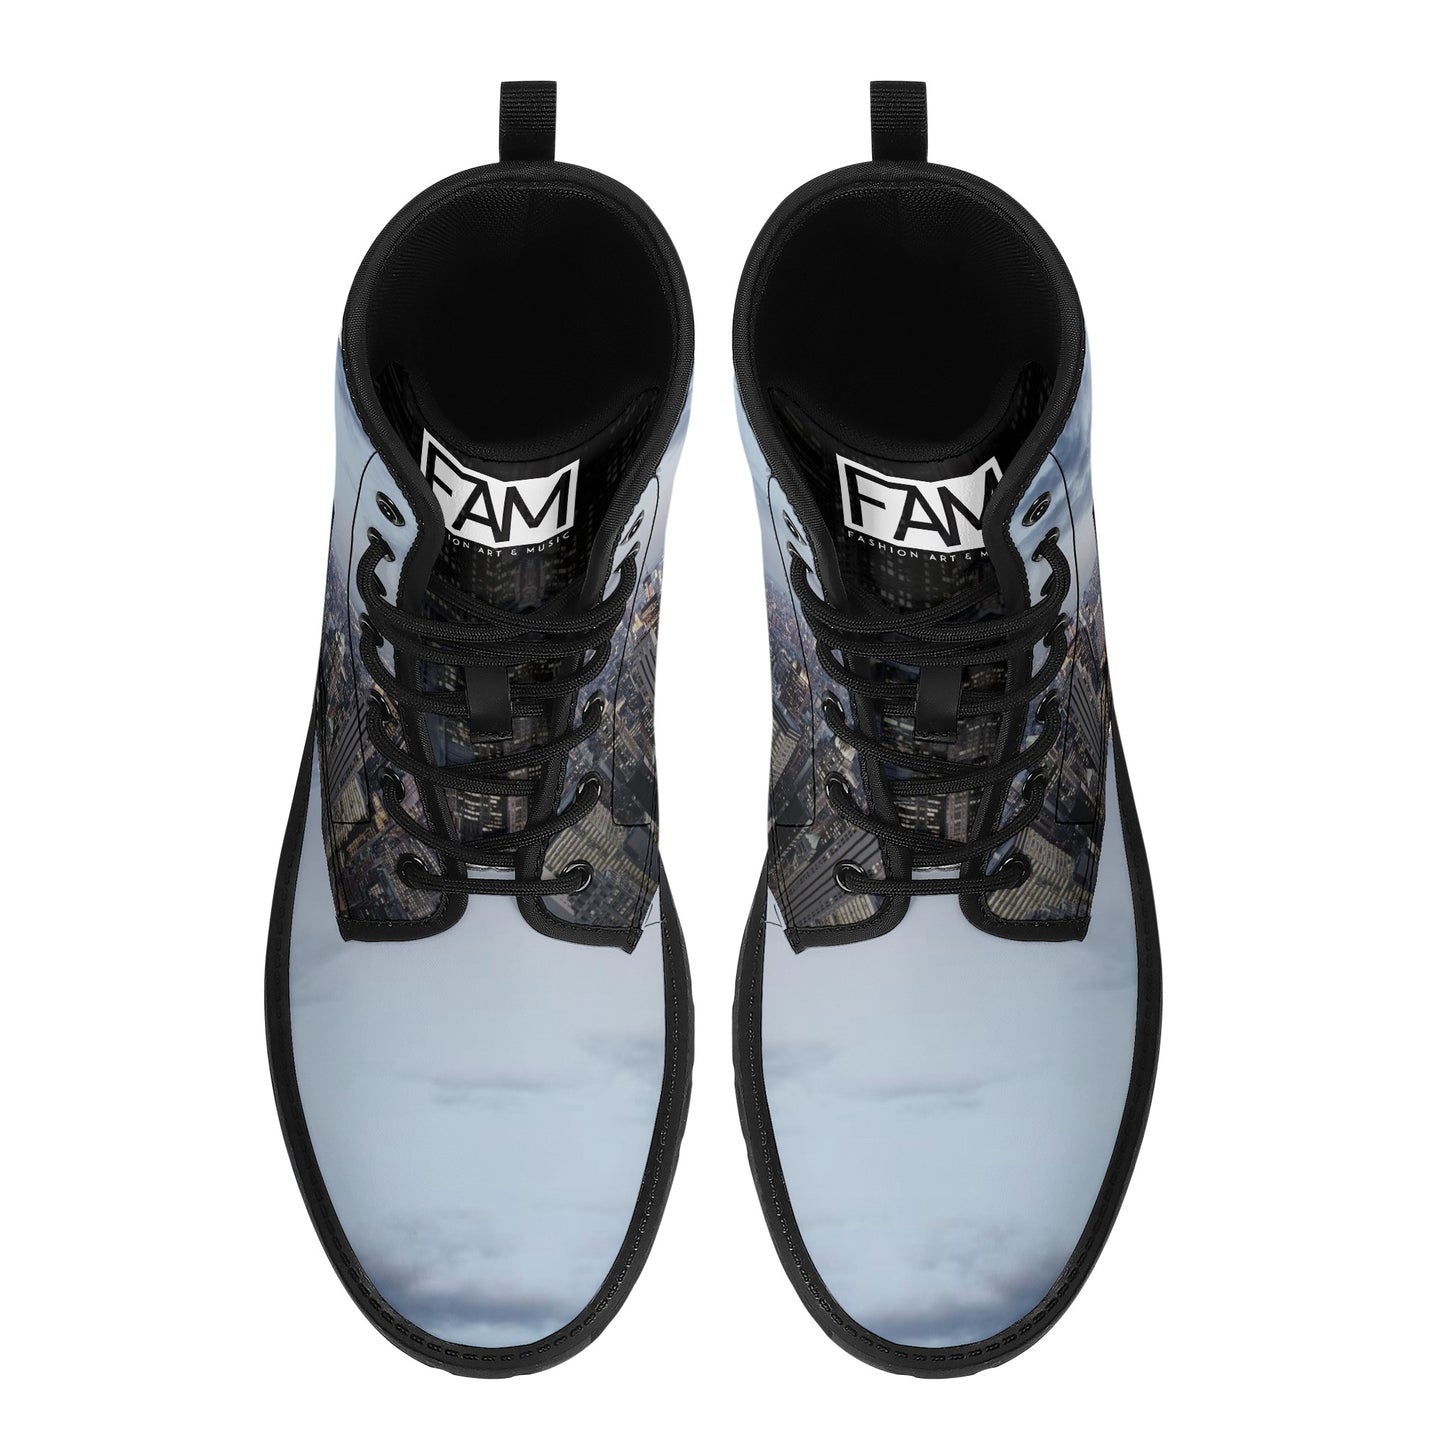 FAM NYC Men's Leather Boots